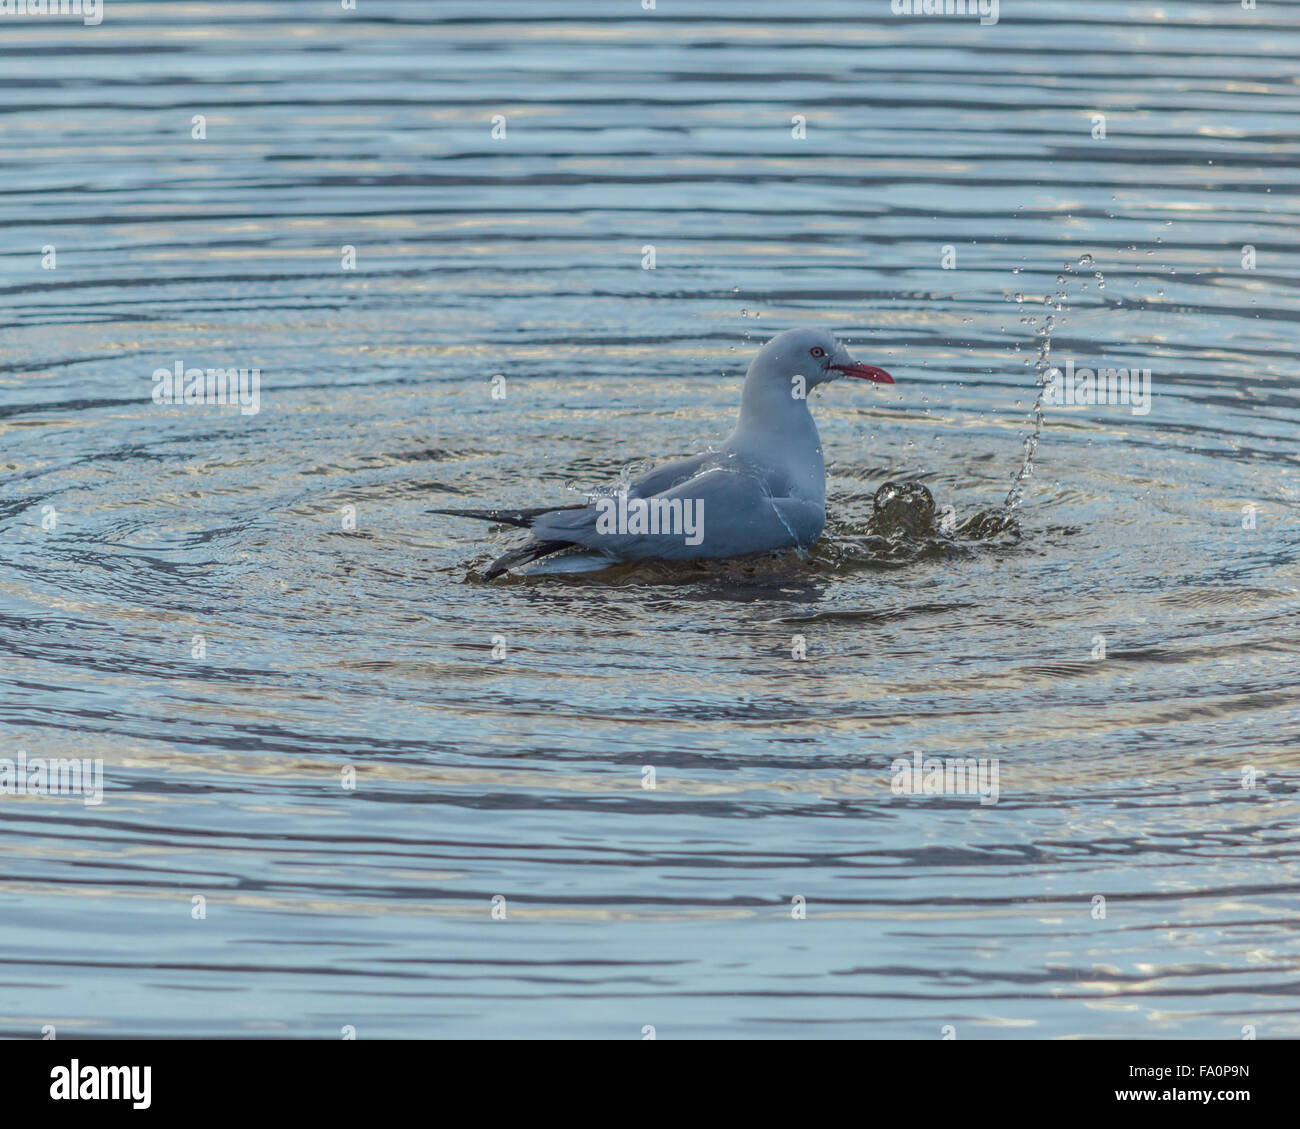 Seagull causing ripples by bathing in water Stock Photo